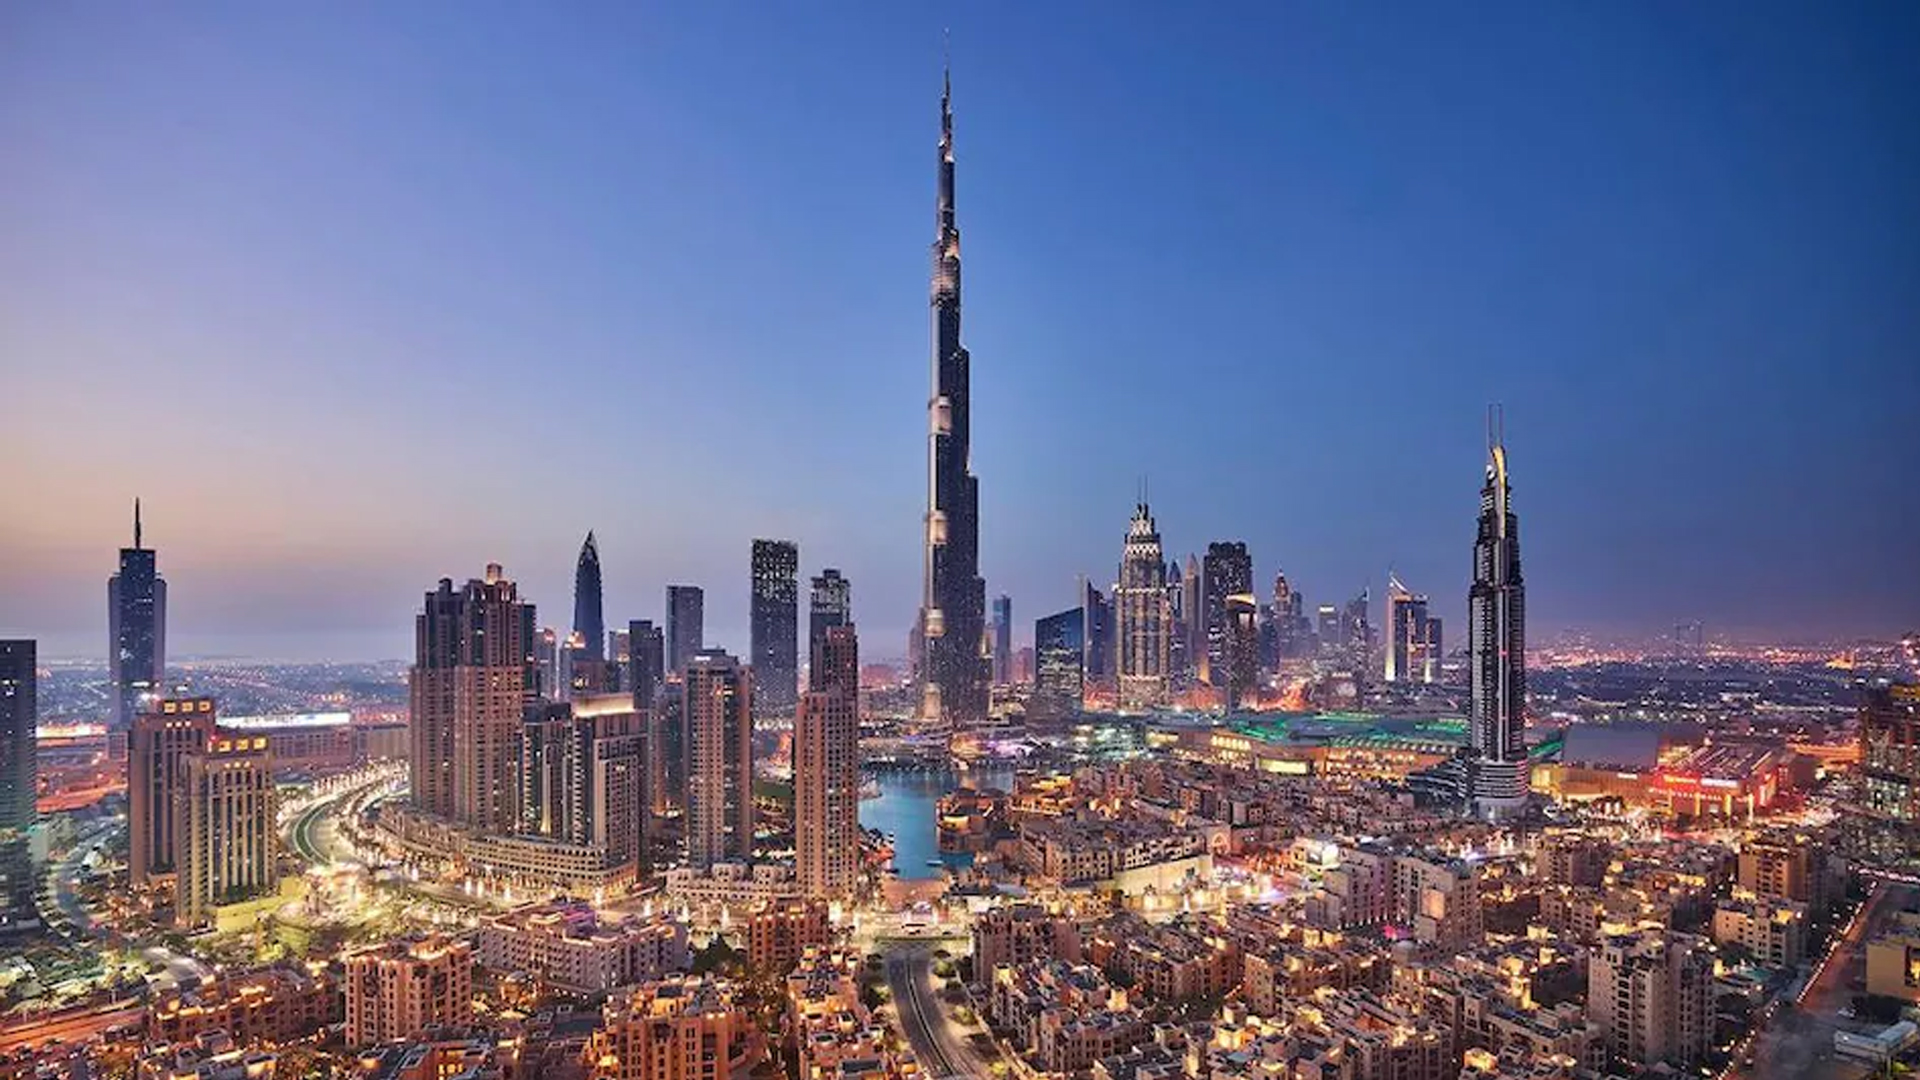 Dubai Has Been Crowned the World’s 3rd Top City